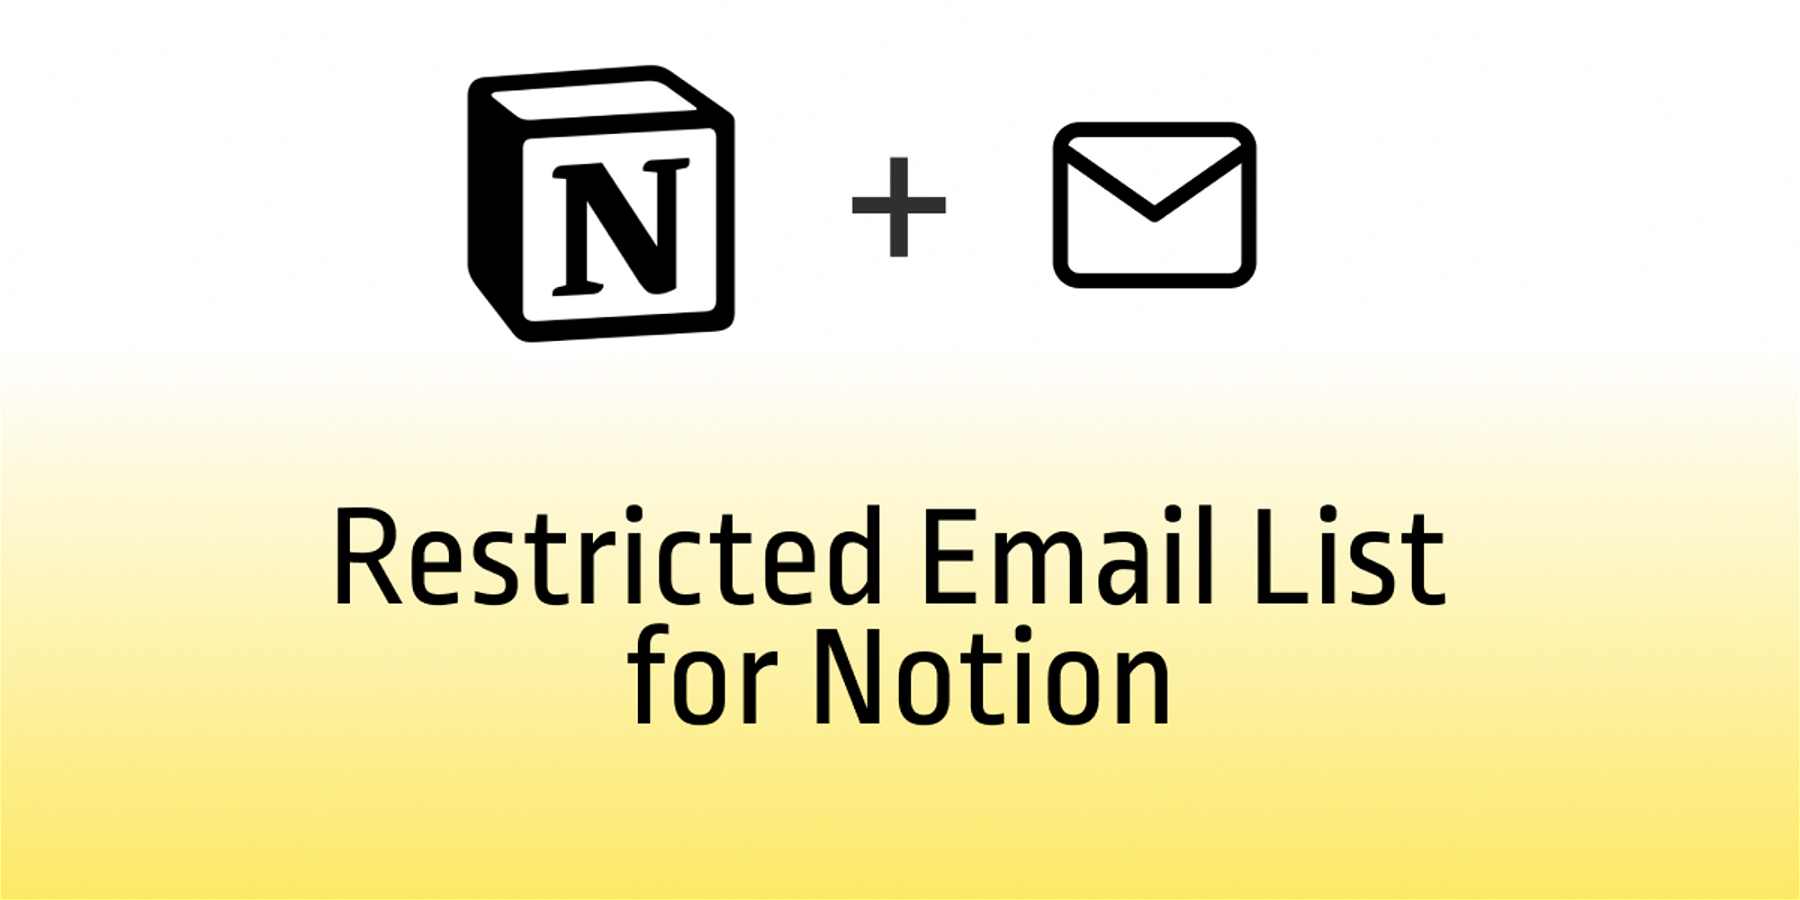 How to Use Restricted Email List with Sotion: Members-only Access for Your Notion Site